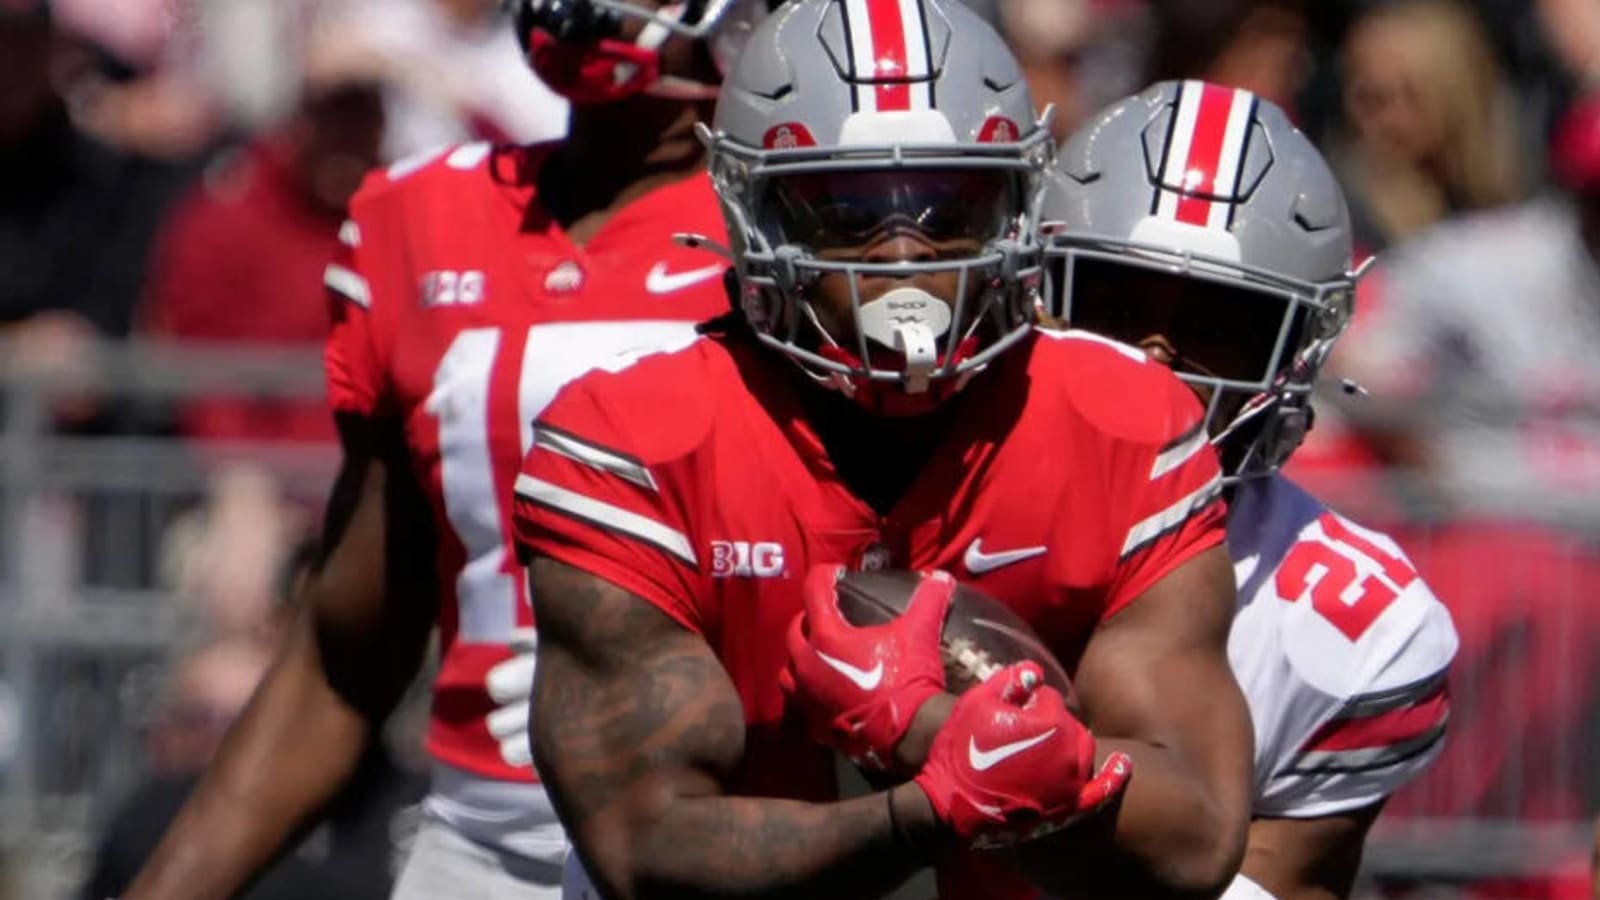 How things unfolded with adding Quinshon Judkins shows why Ohio State may win a national championship